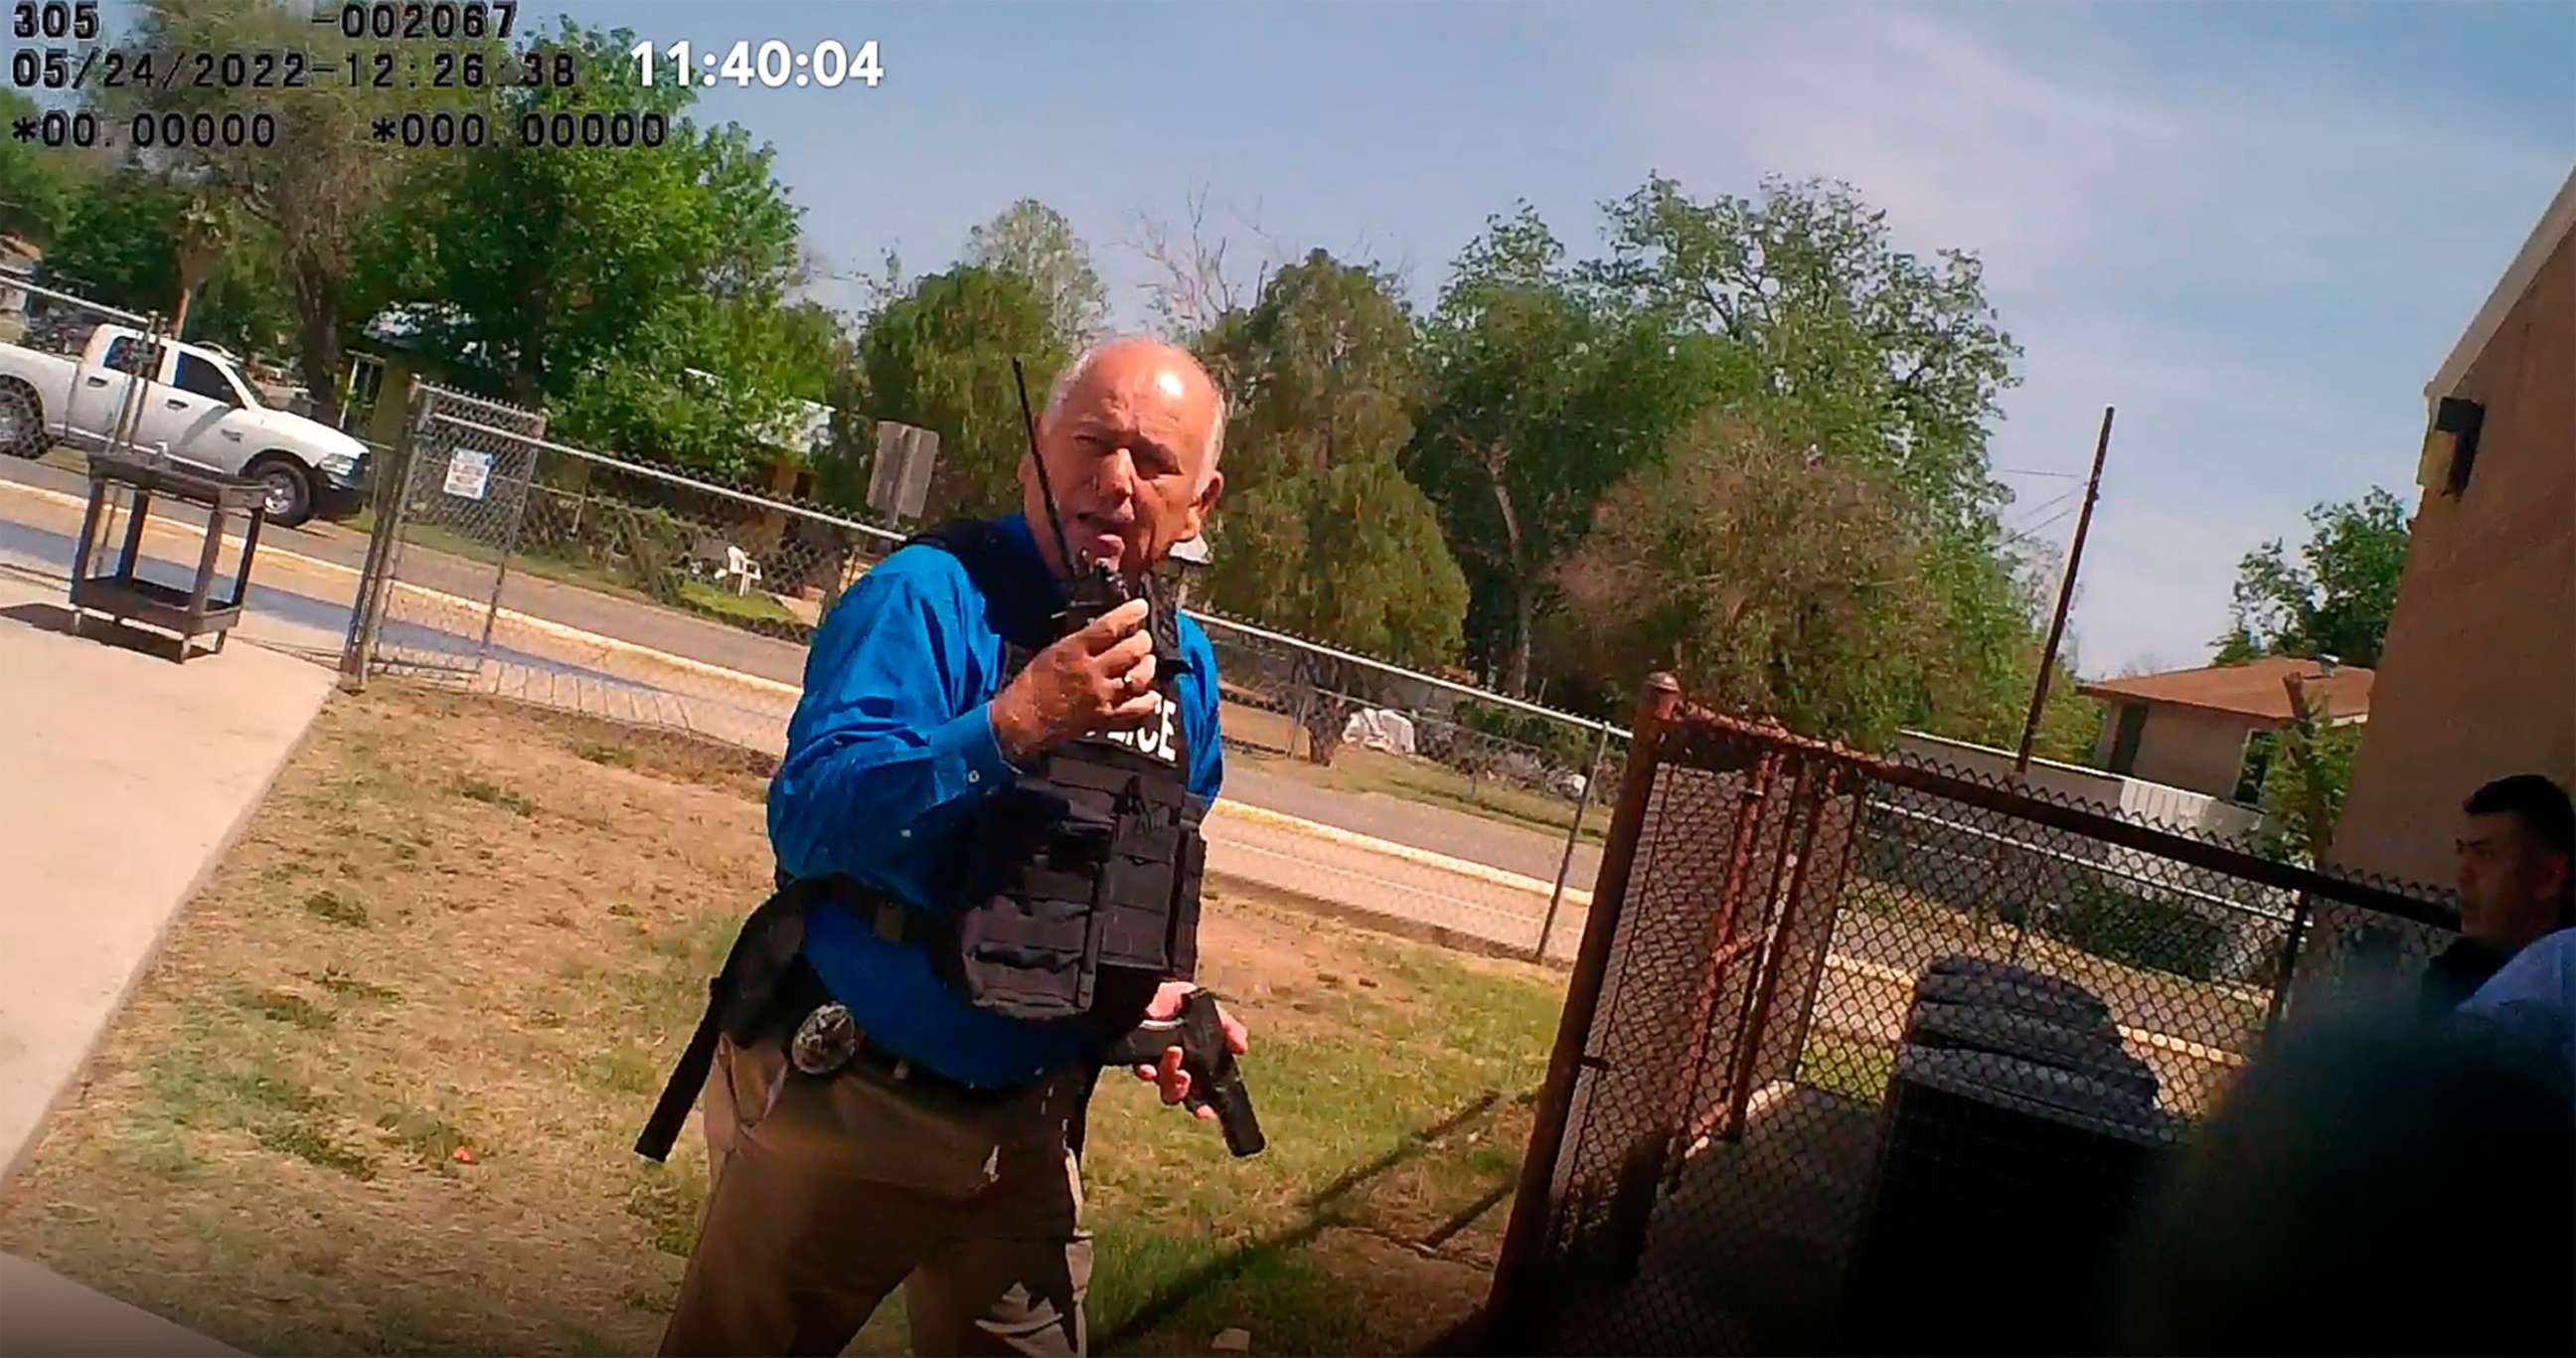 PHOTO: This image from video released by the City of Uvalde, Texas shows city police Lt. Mariano Pargas responding to a shooting at Robb Elementary School, on May 24, 2022 in Uvalde, Texas.